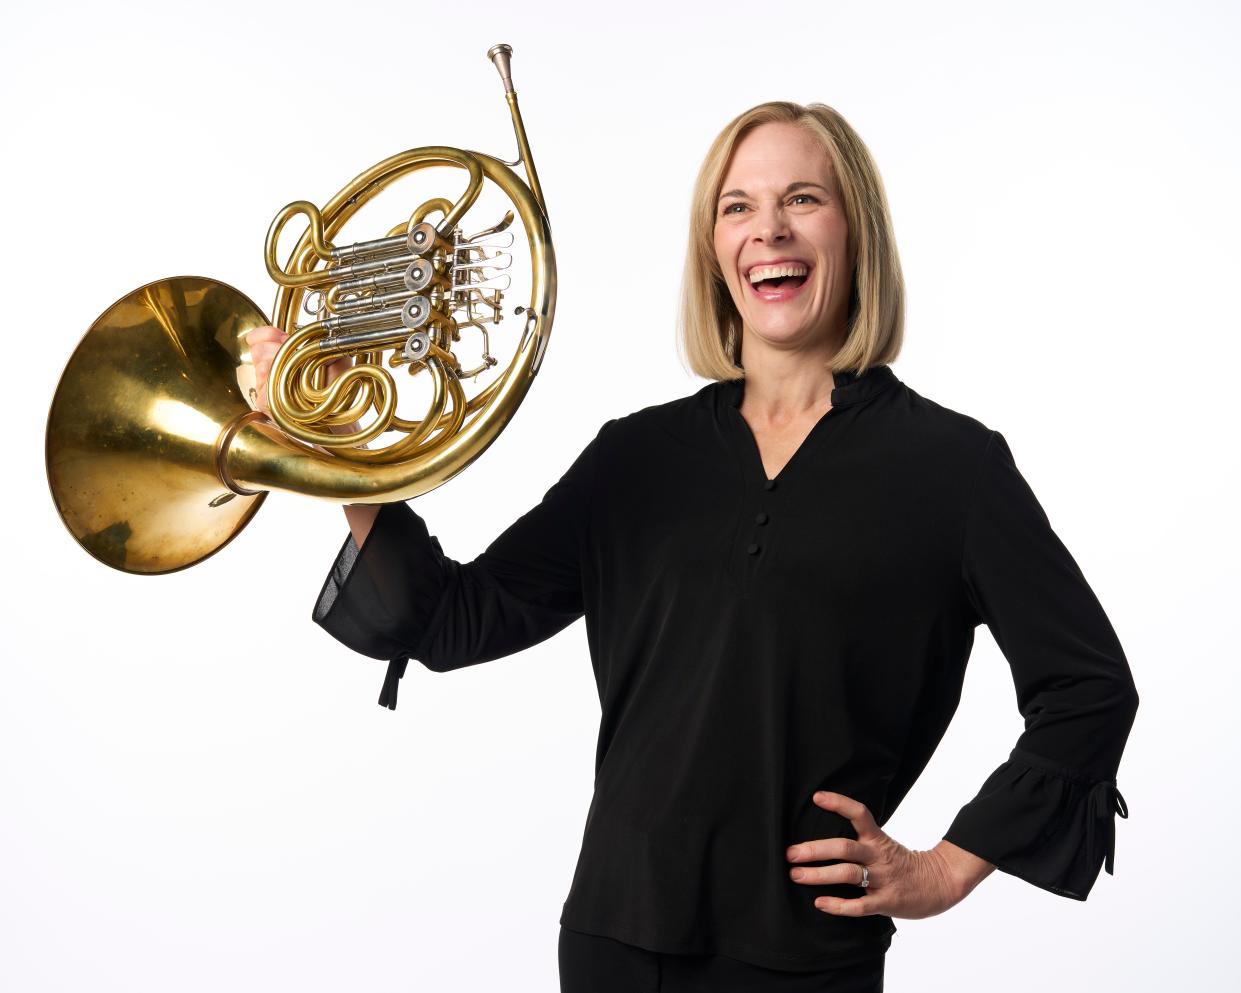 Elizabeth Freimuth, the Cincinnati Symphony Orchestra’s principal horn player, will be the featured soloist on a pair of CSO subscription concerts next season. She’ll perform Richard Strauss’ Horn Concerto No. 1 on Jan. 31 and Feb. 1, 2025, with guest conductor Jun Märkl.